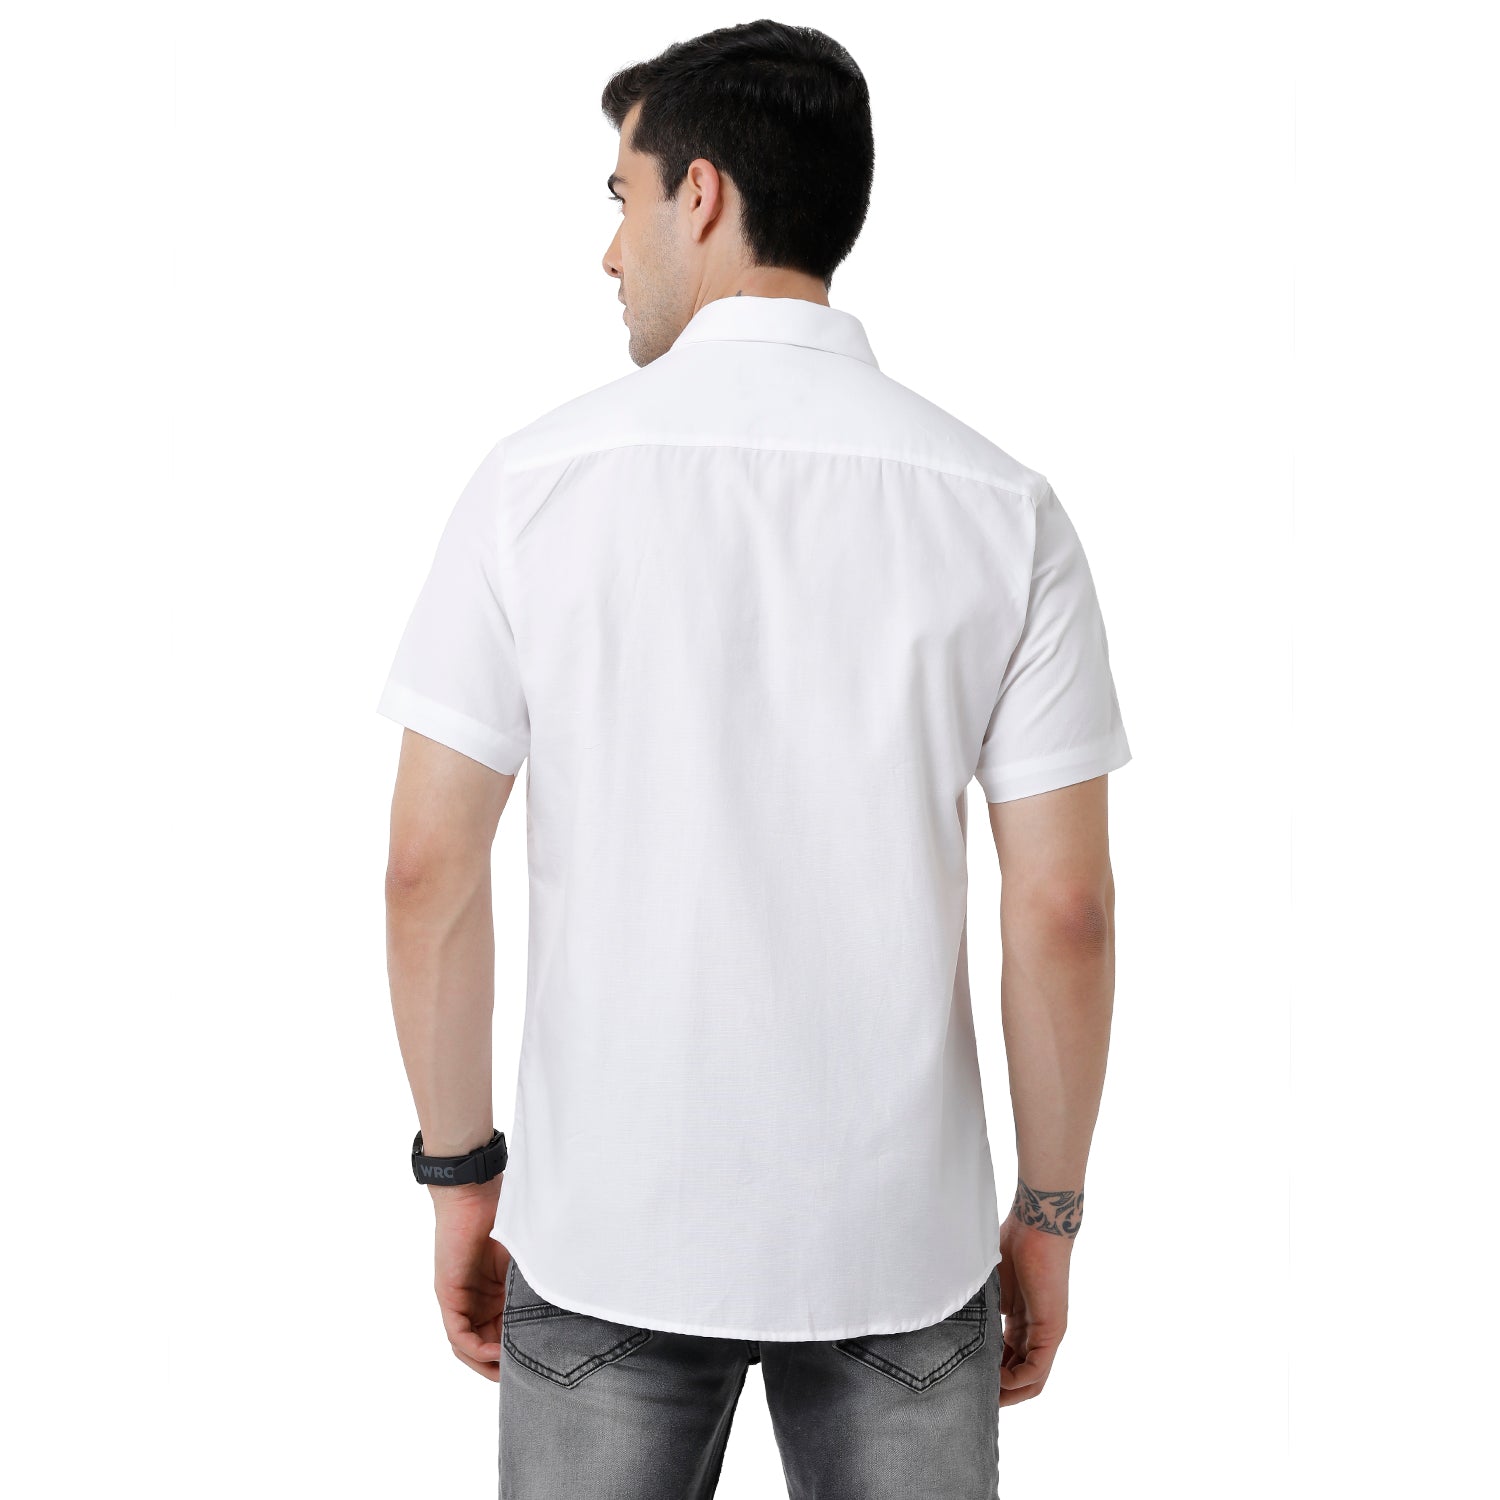 Classic Polo Mens 100% Cotton Solid Slim Fit Half Sleeve White Color Shirt - White 02 Hs Shirts Classic Polo 